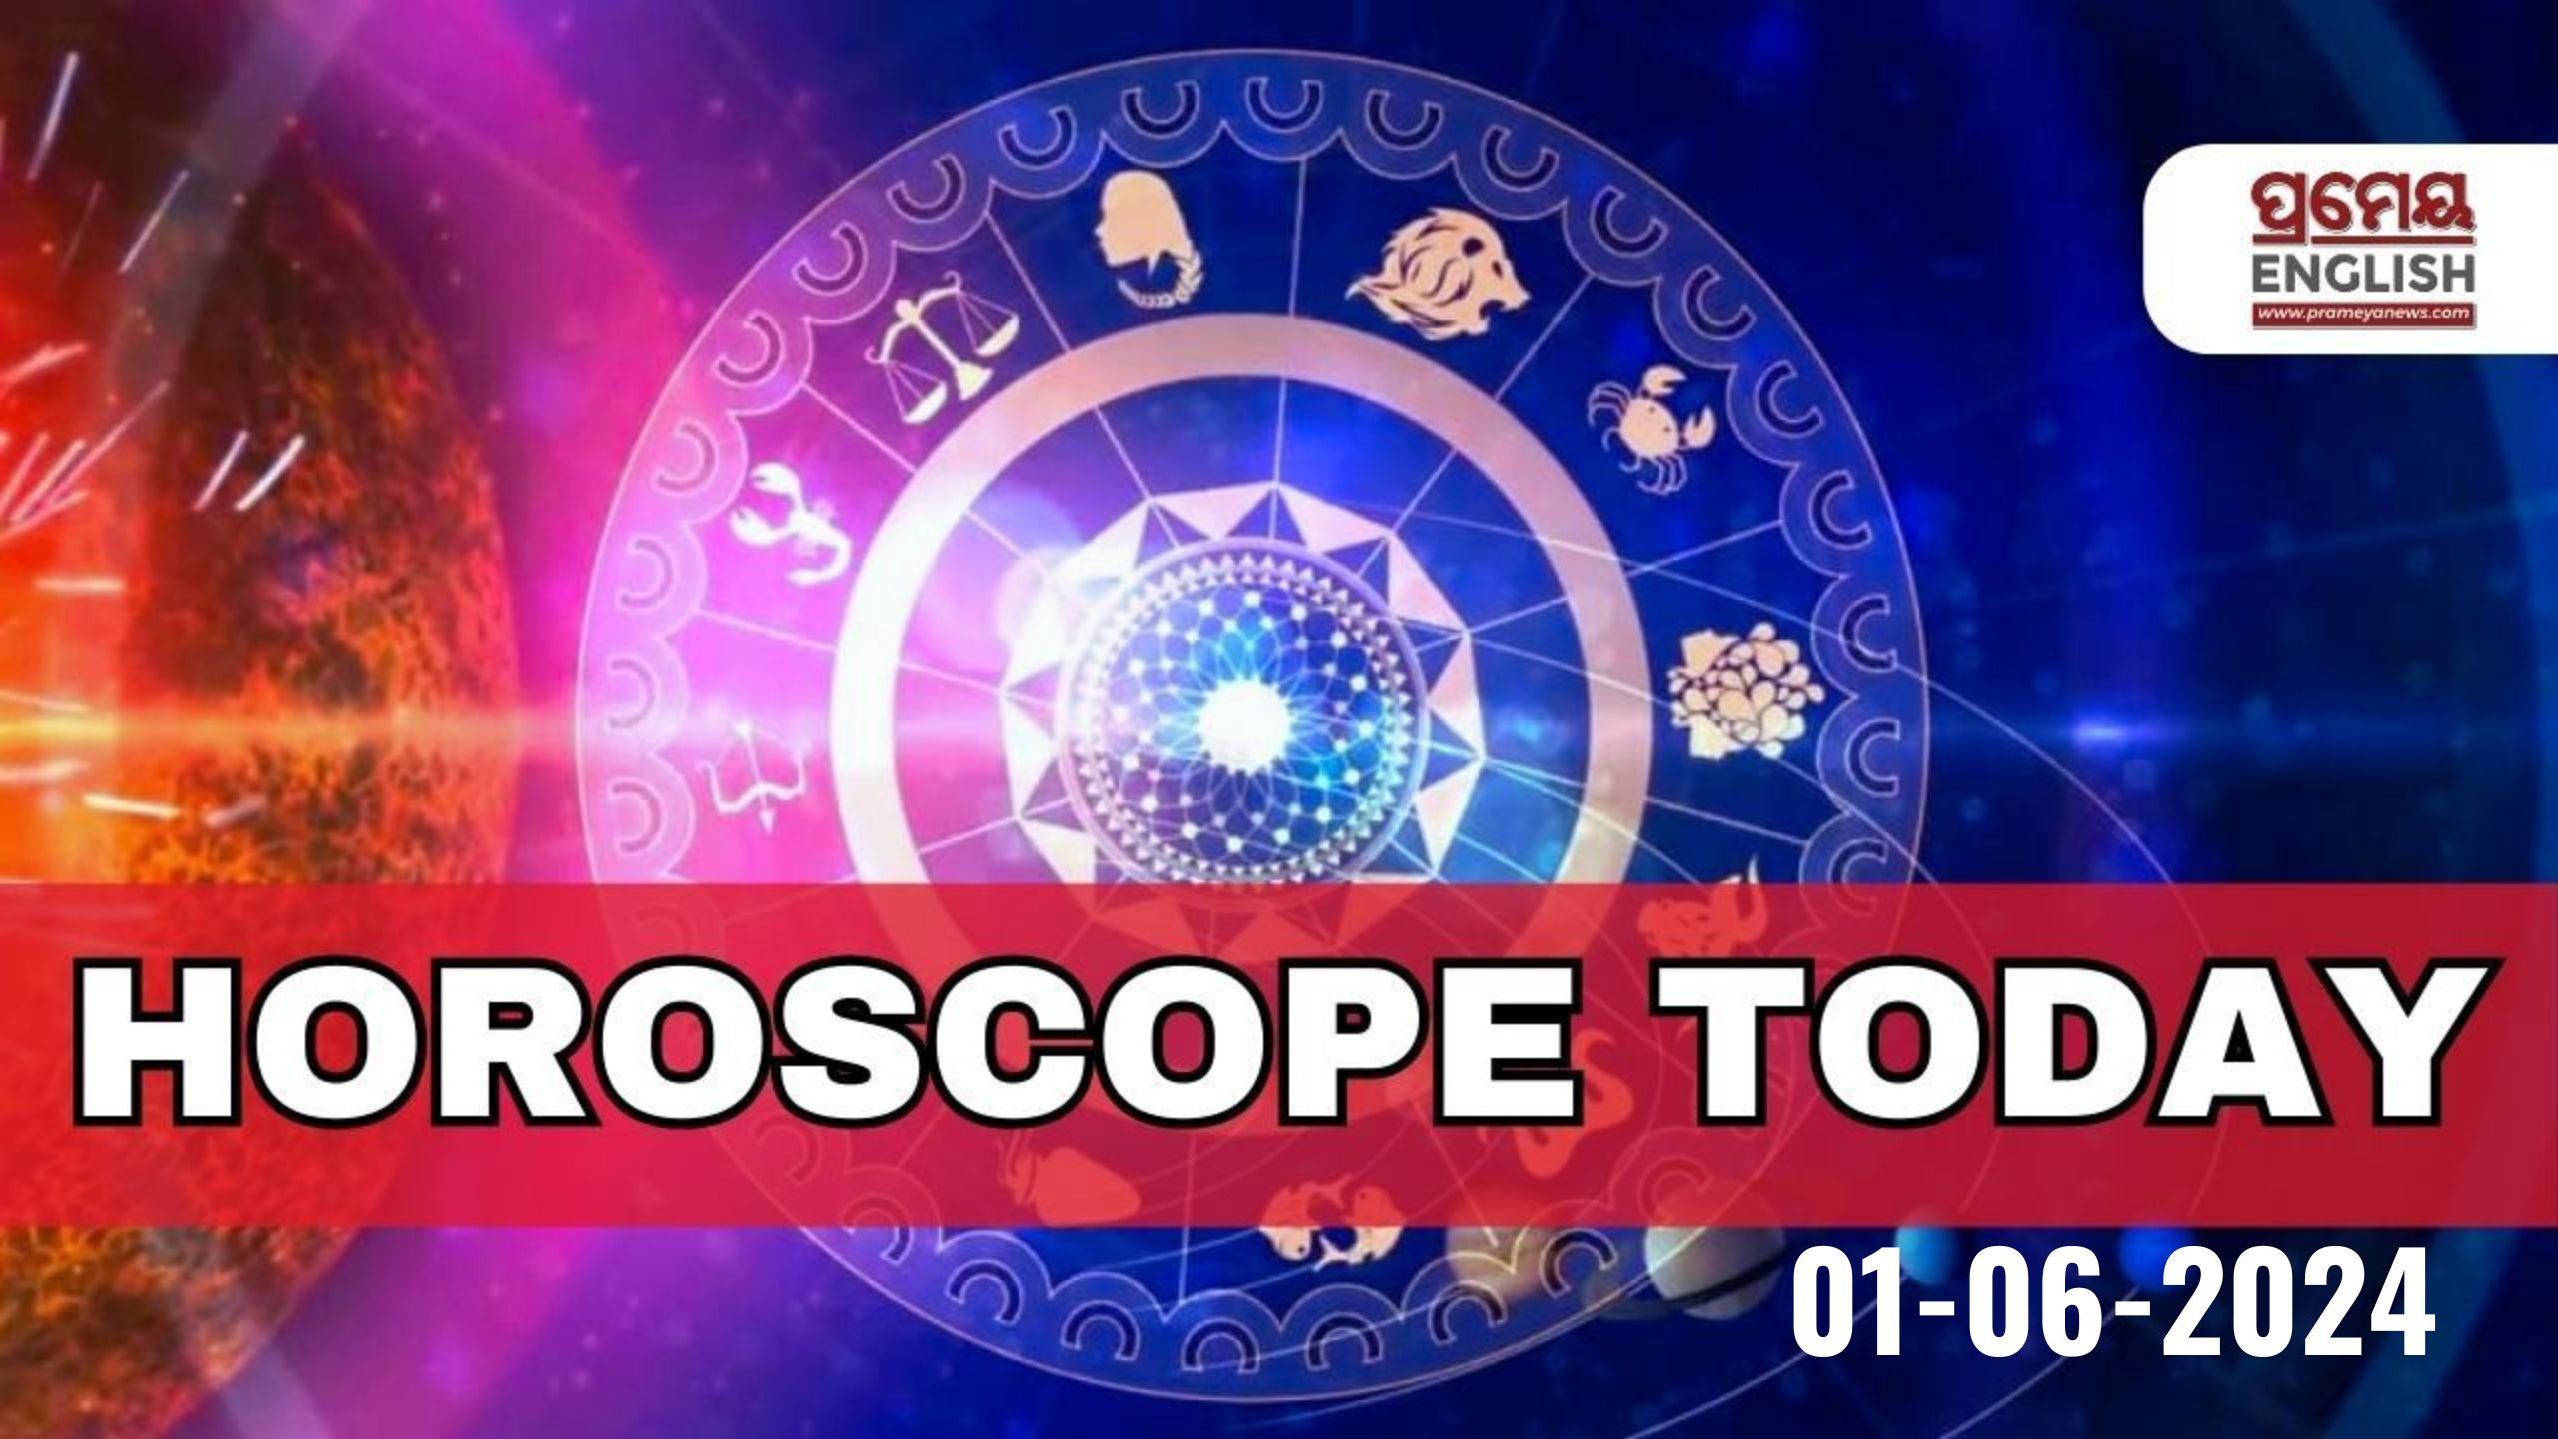 Horoscope Today: Astrological prediction for June 1, 2024